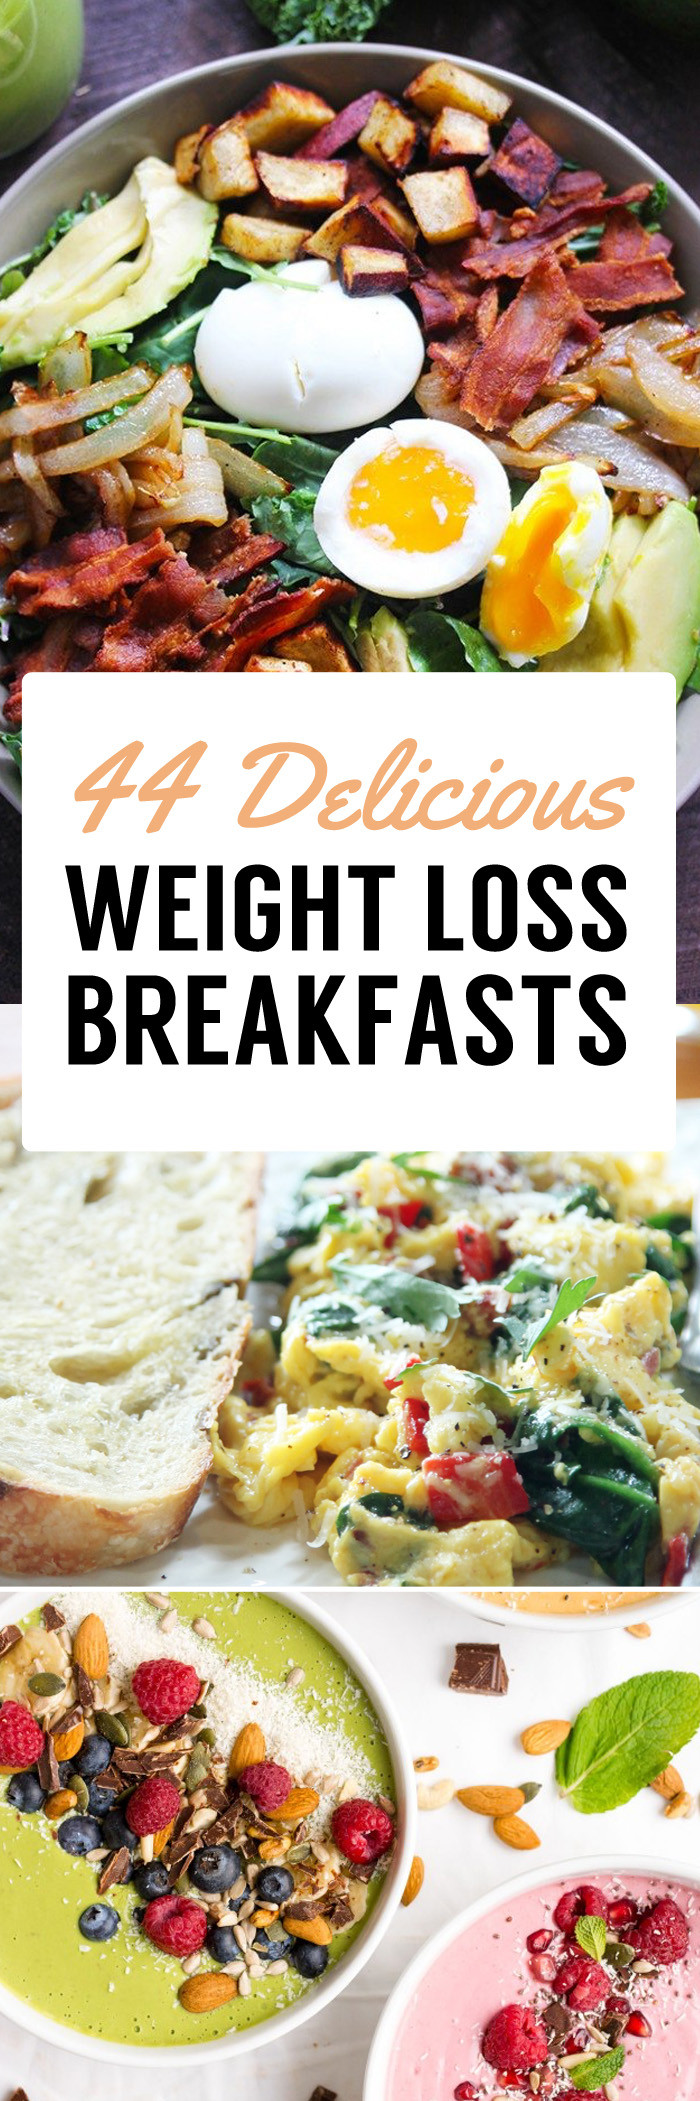 Weight Loss Breakfasts Recipes Best Of 44 Weight Loss Breakfast Recipes to Jumpstart Your Fat